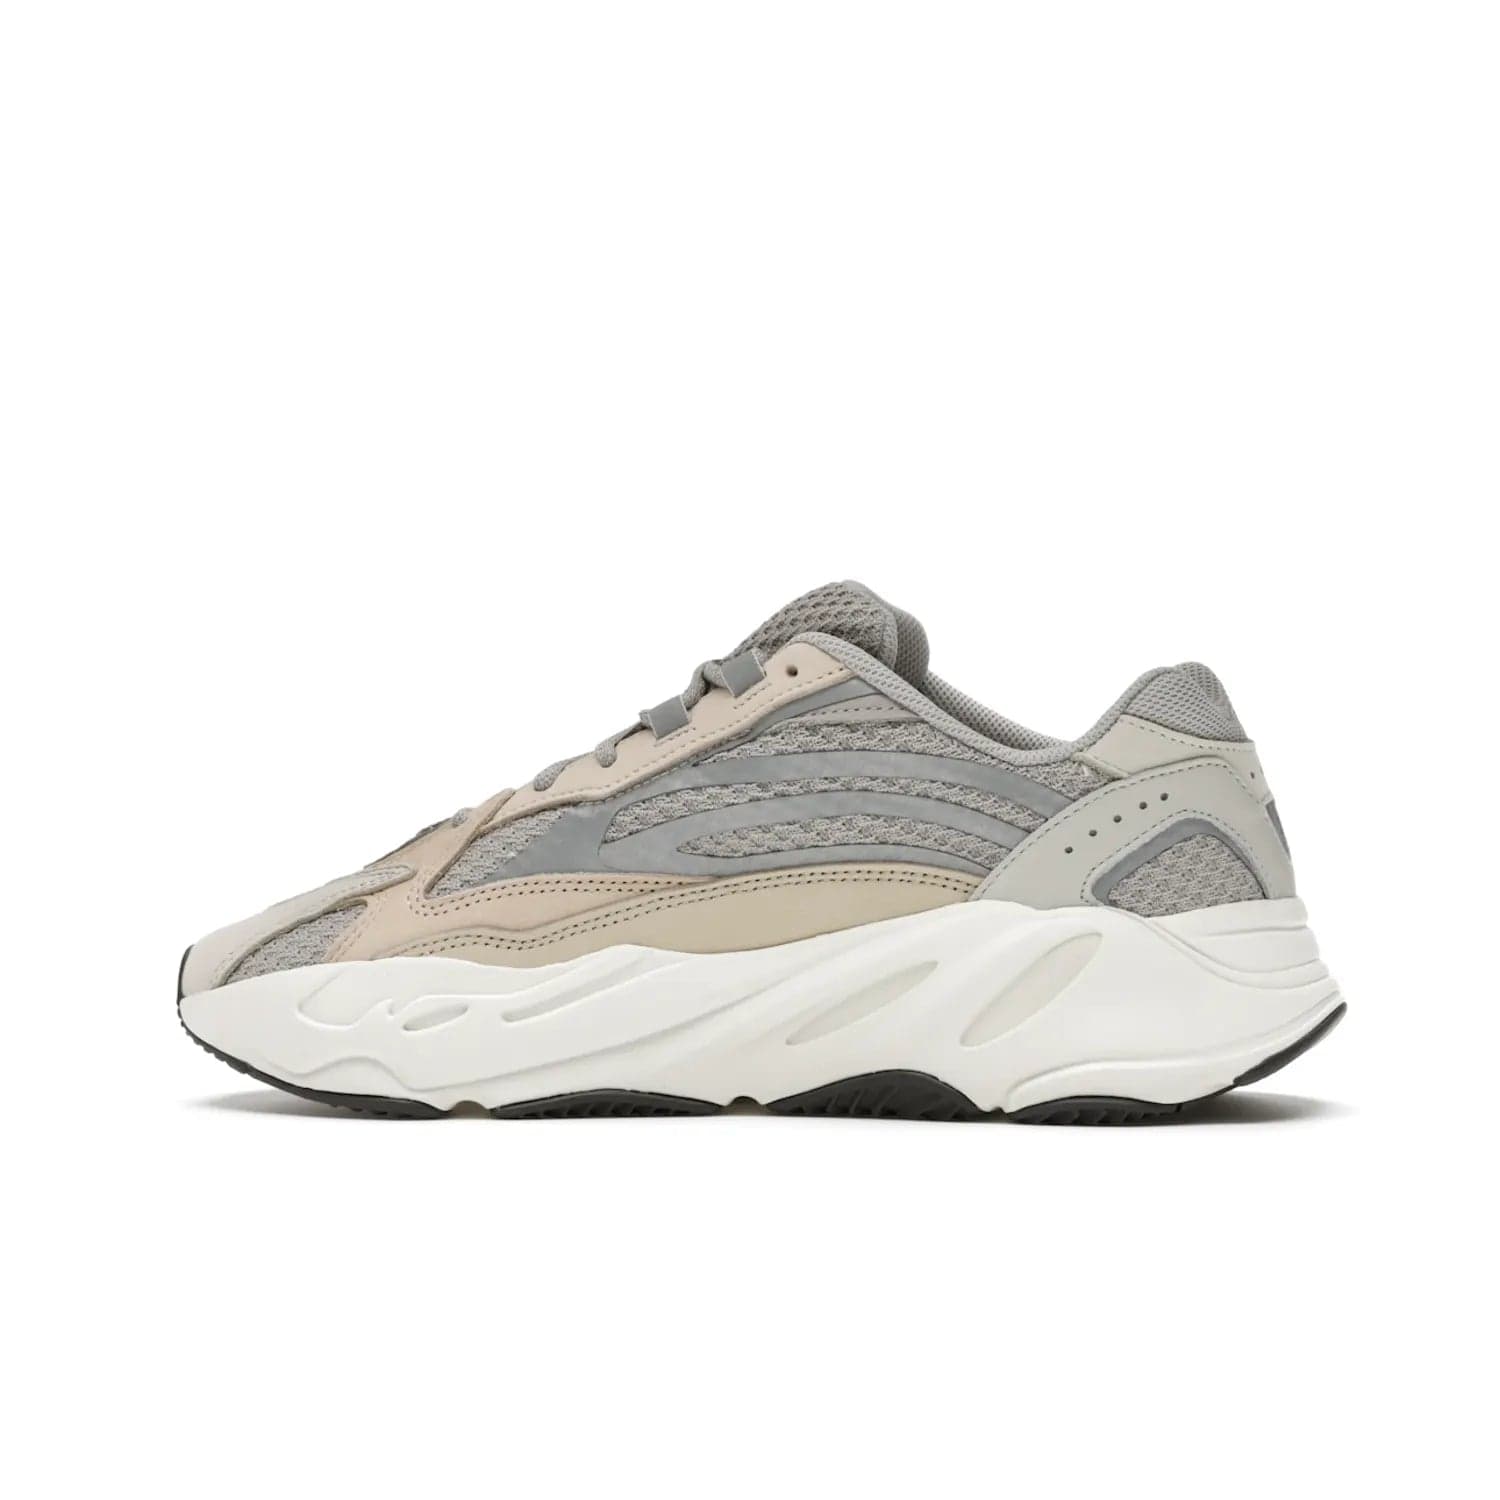 adidas Yeezy Boost 700 V2 Cream - Image 20 - Only at www.BallersClubKickz.com - Add style and luxury to your wardrobe with the adidas Yeezy 700 V2 Cream. Featuring a unique reflective upper, leather overlays, mesh underlays and the signature BOOST midsole, this silhouette is perfect for any stylish wardrobe.